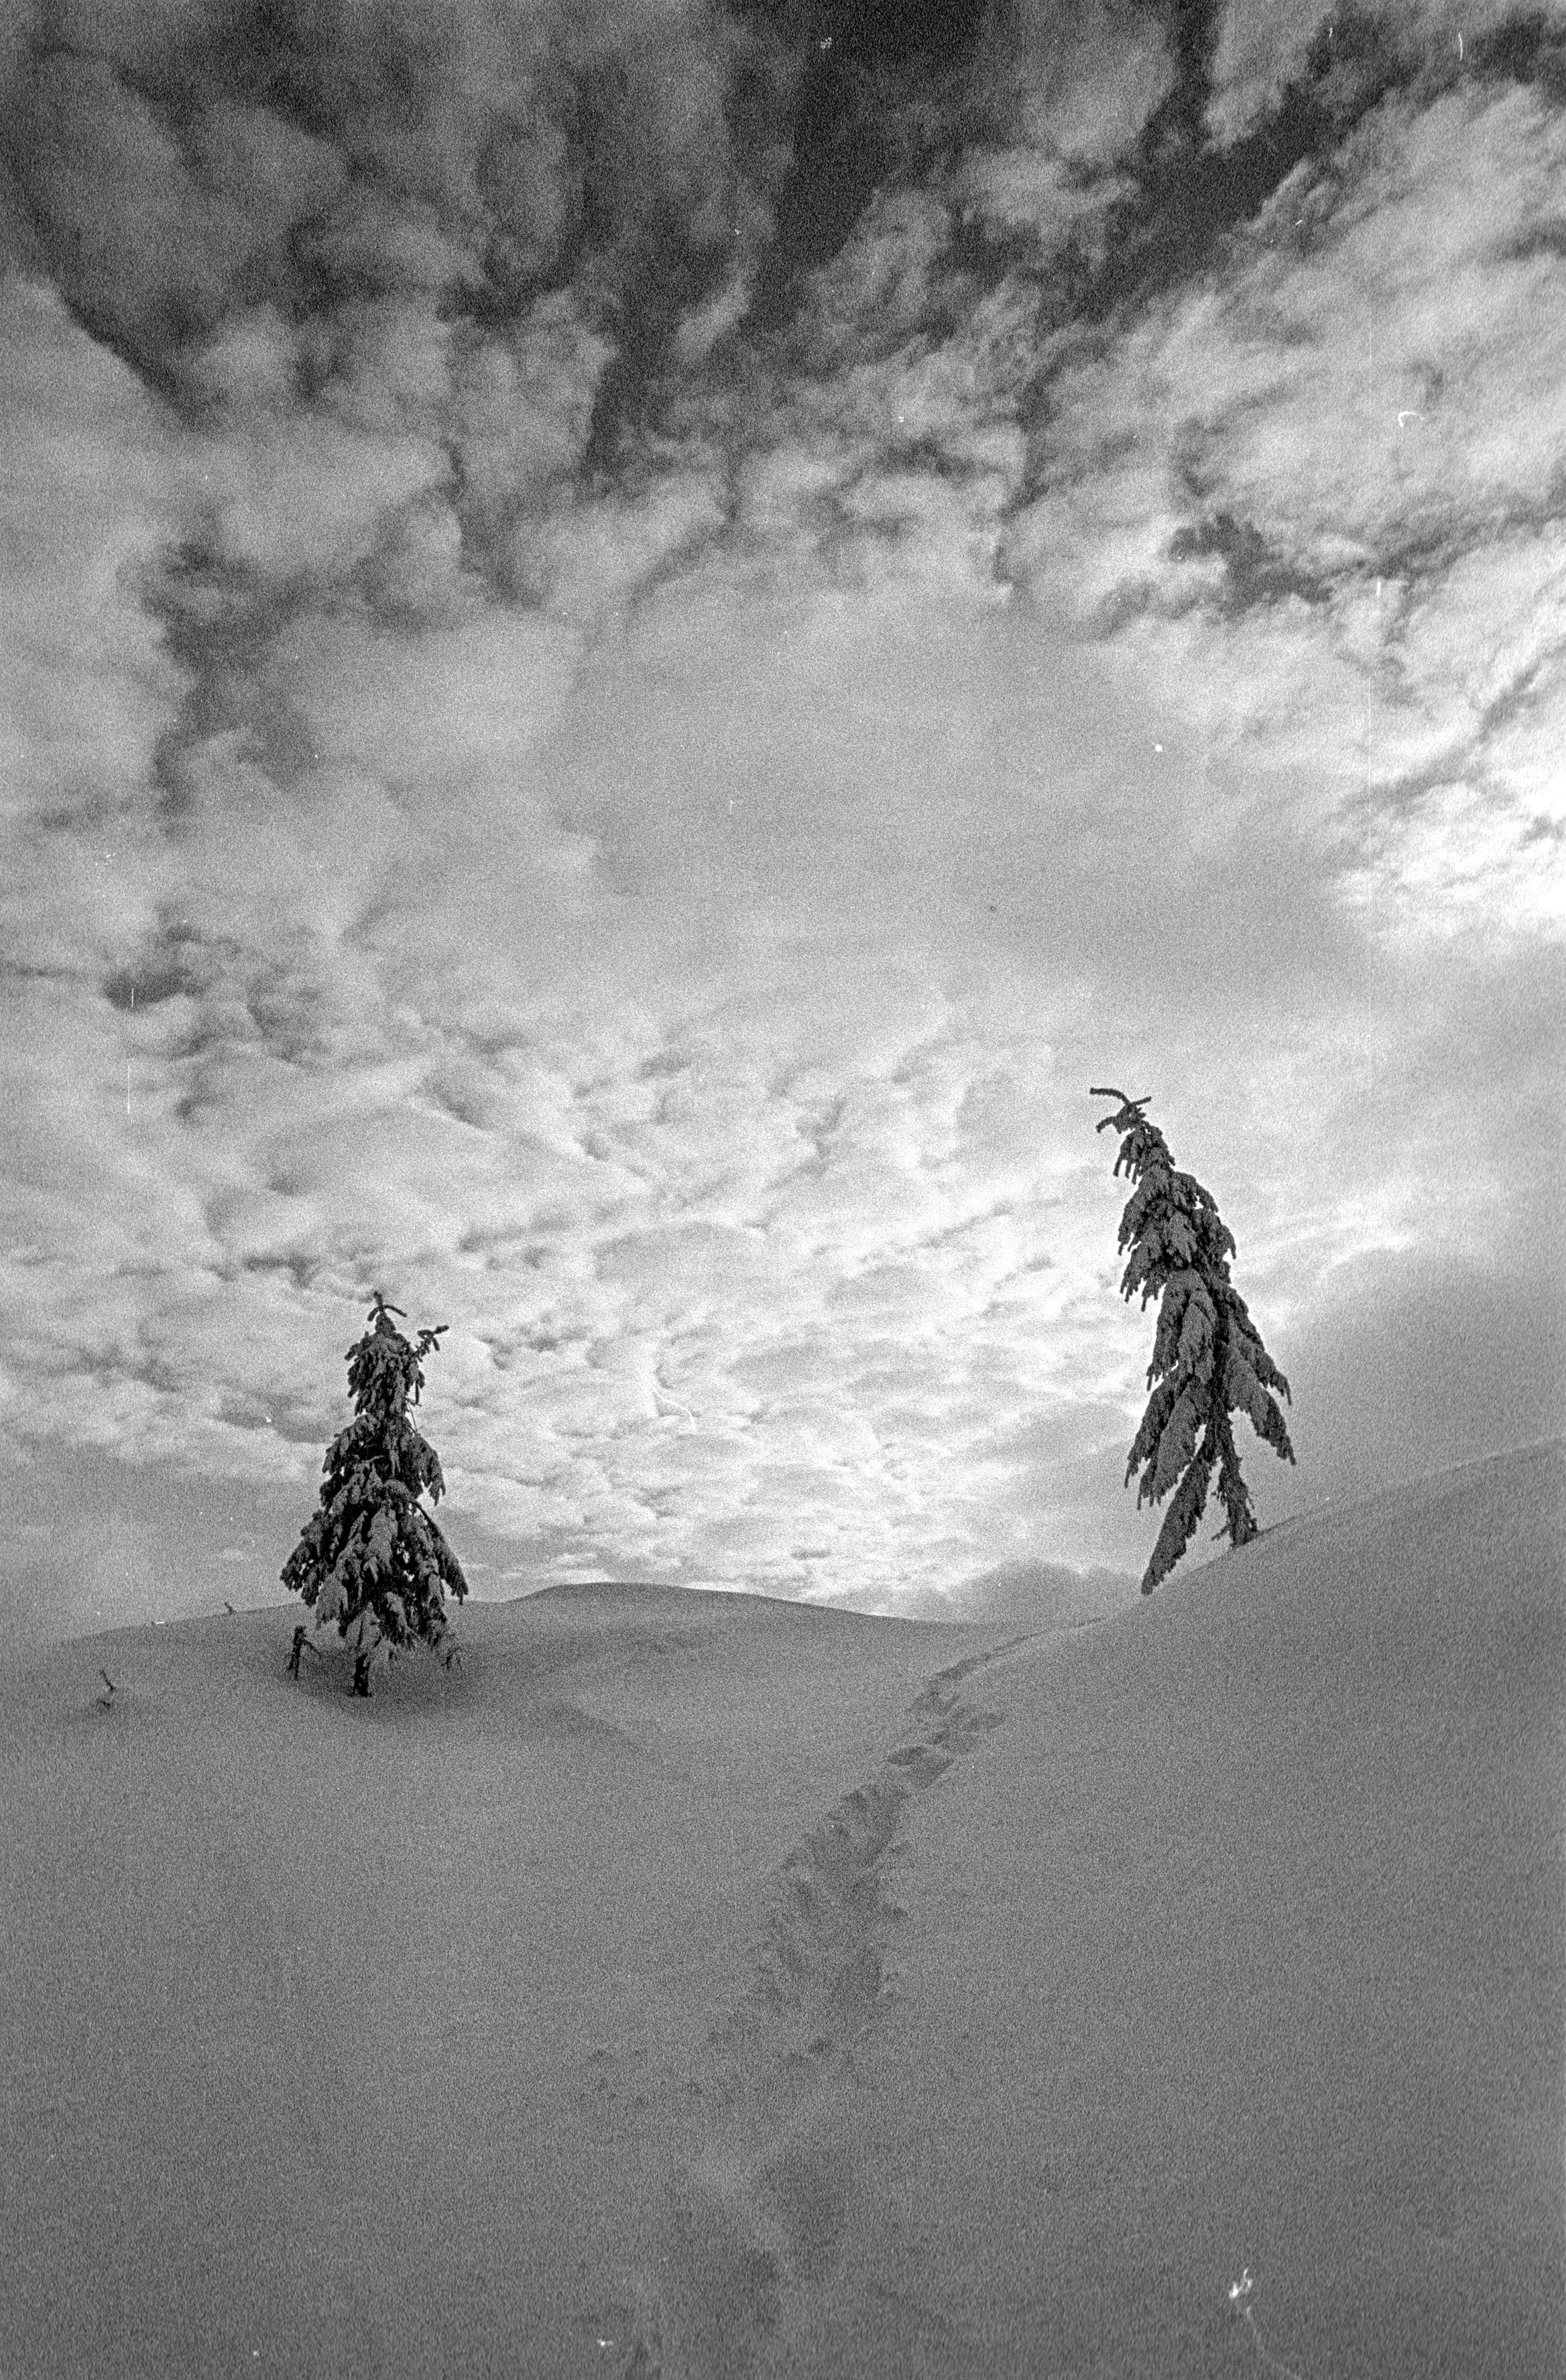 The image is a black and white photograph of two trees in a snowy hill.
The trees are covered with snow. The slope is covered with pristine snow. Only between two trees is a path of human footprints.

The sky occupies more than half of the image. It is covered with small clouds through which you can see the sky